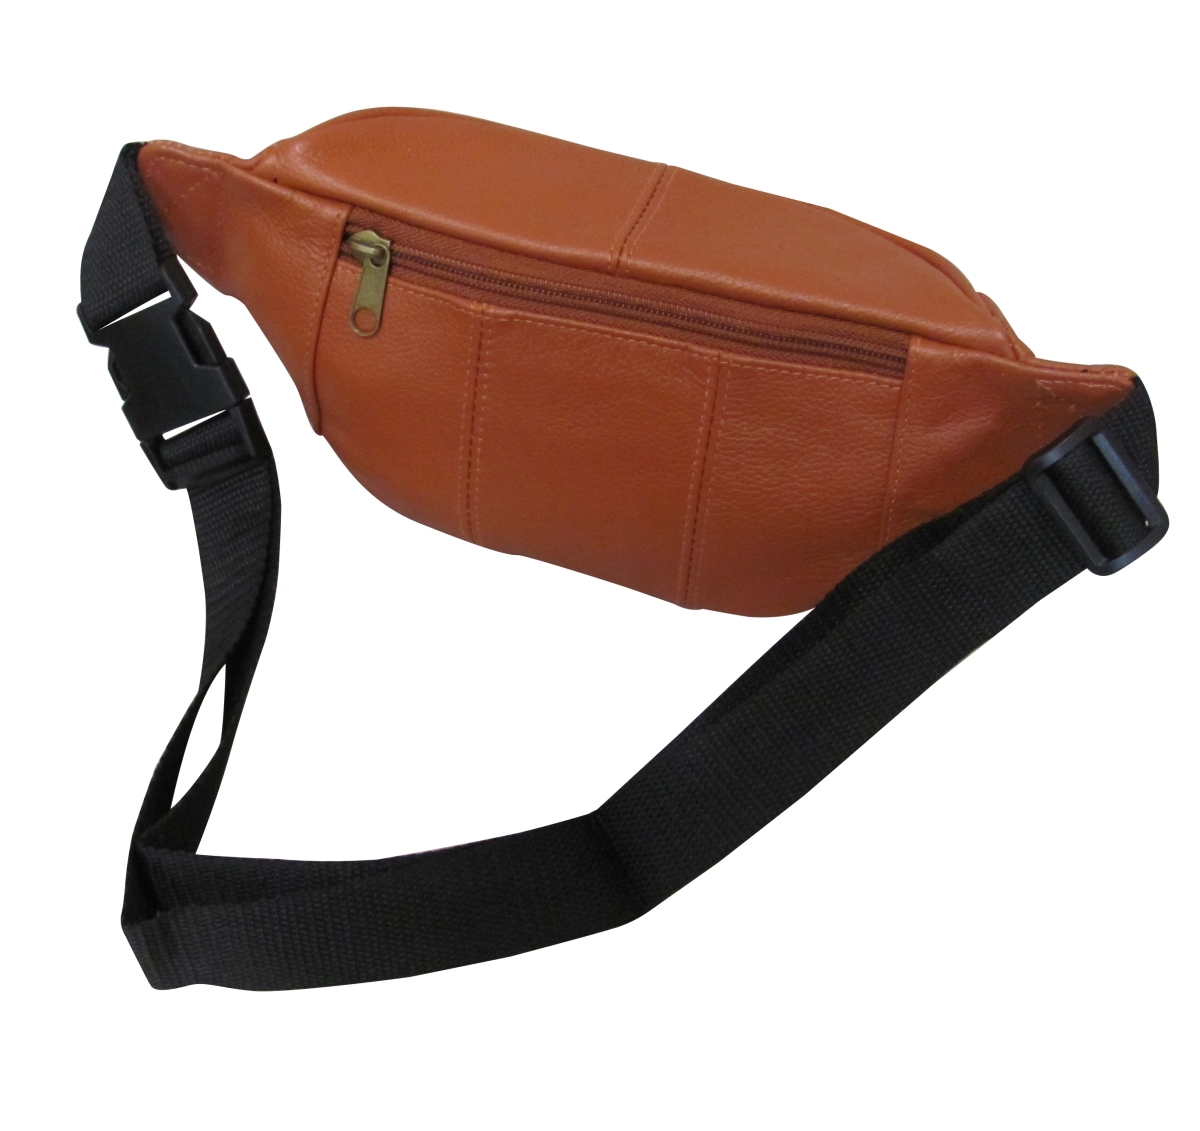 Picture of Amerileather 7310-3 23.5 x 14.5 x 8.75 in. Assorted Leather Fanny Packs